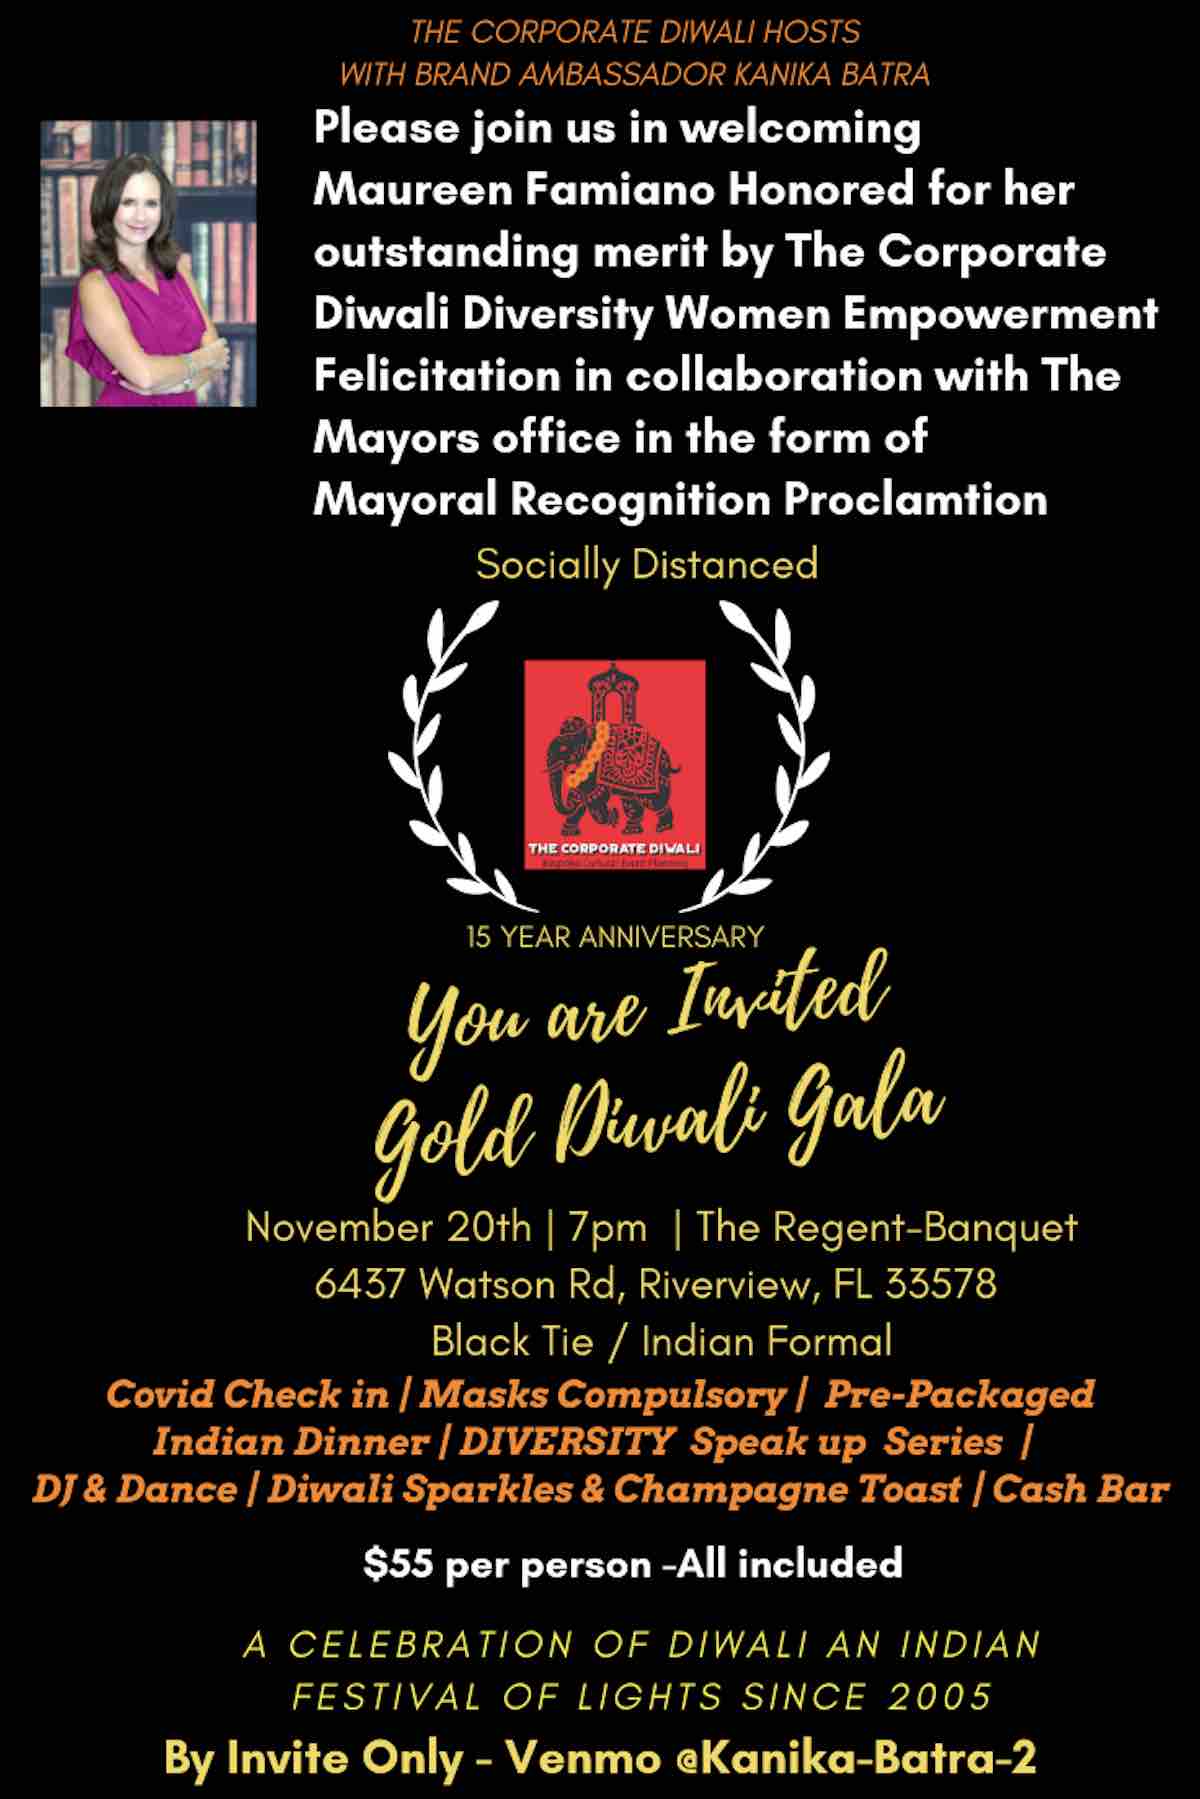 Diwali Event – Maureen Famiano Event Recognition